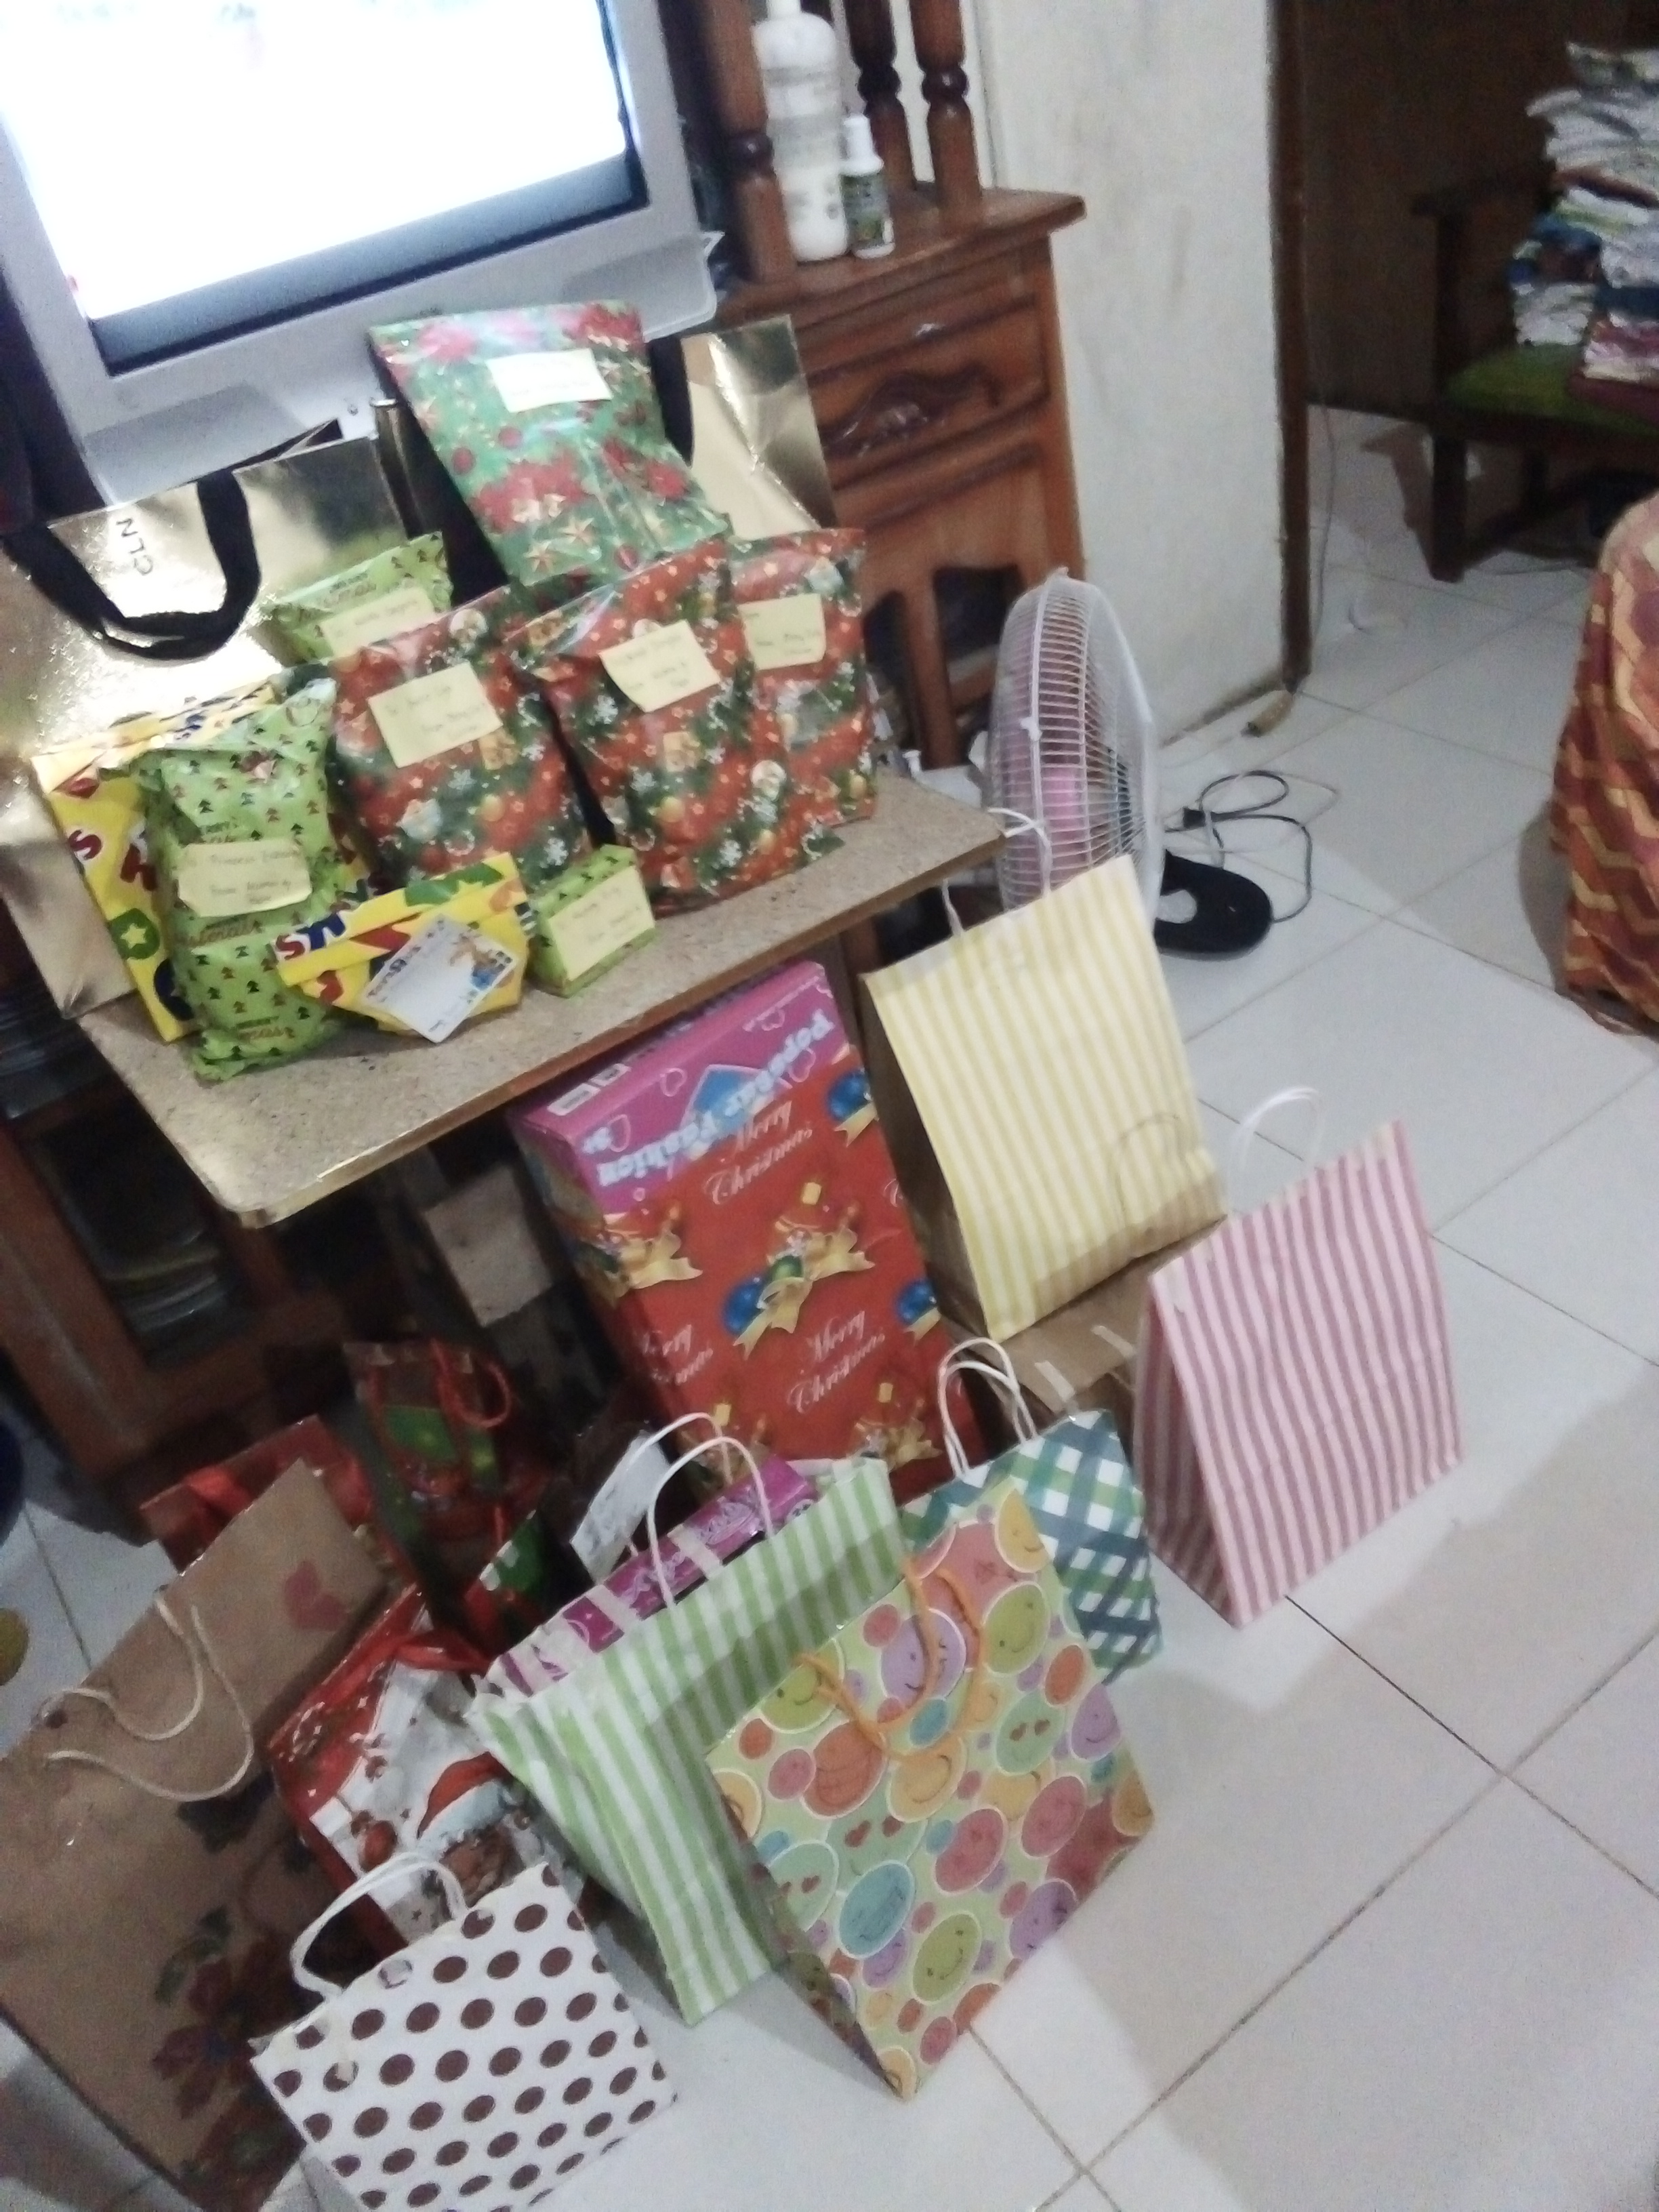  Photo shows my Christmas gifts for my family.